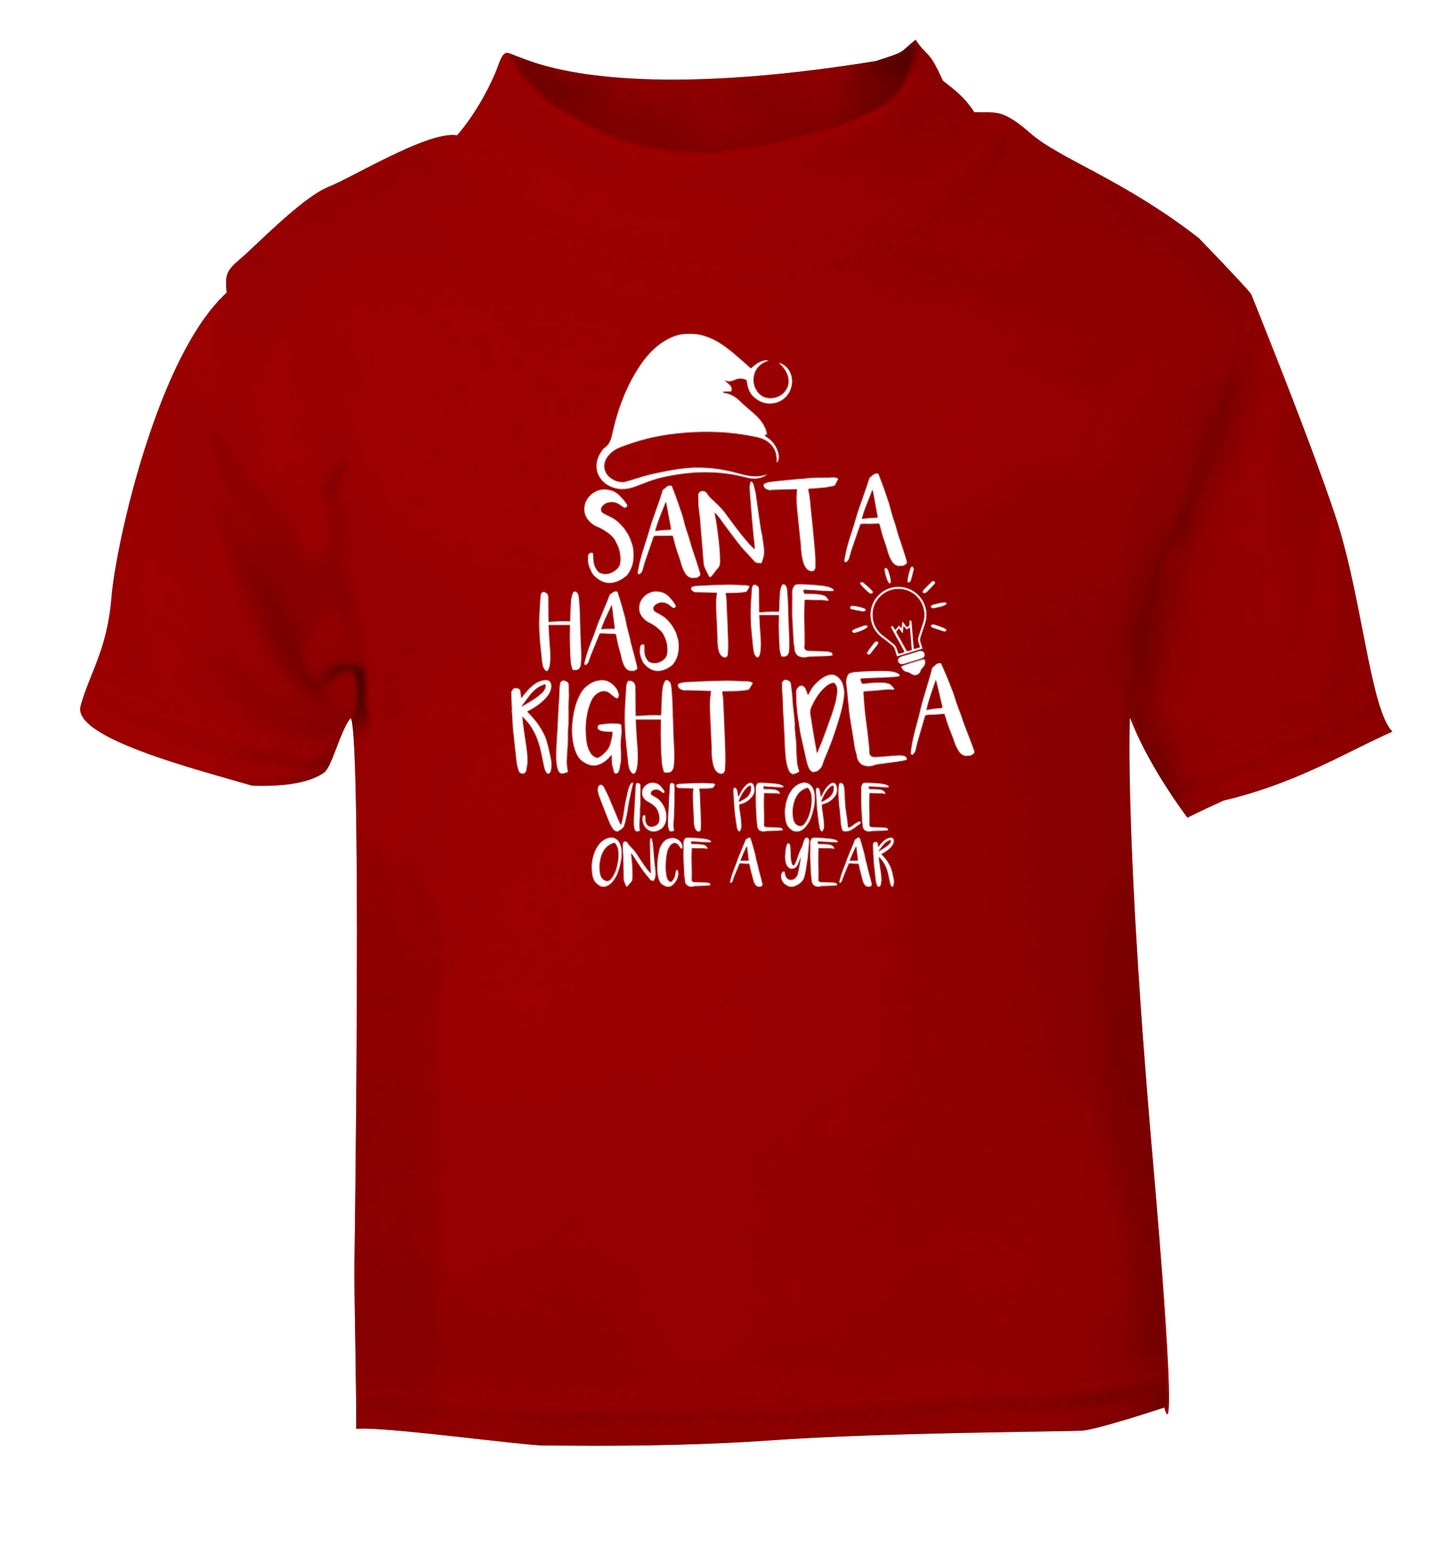 Santa has the right idea visit people once a year red Baby Toddler Tshirt 2 Years